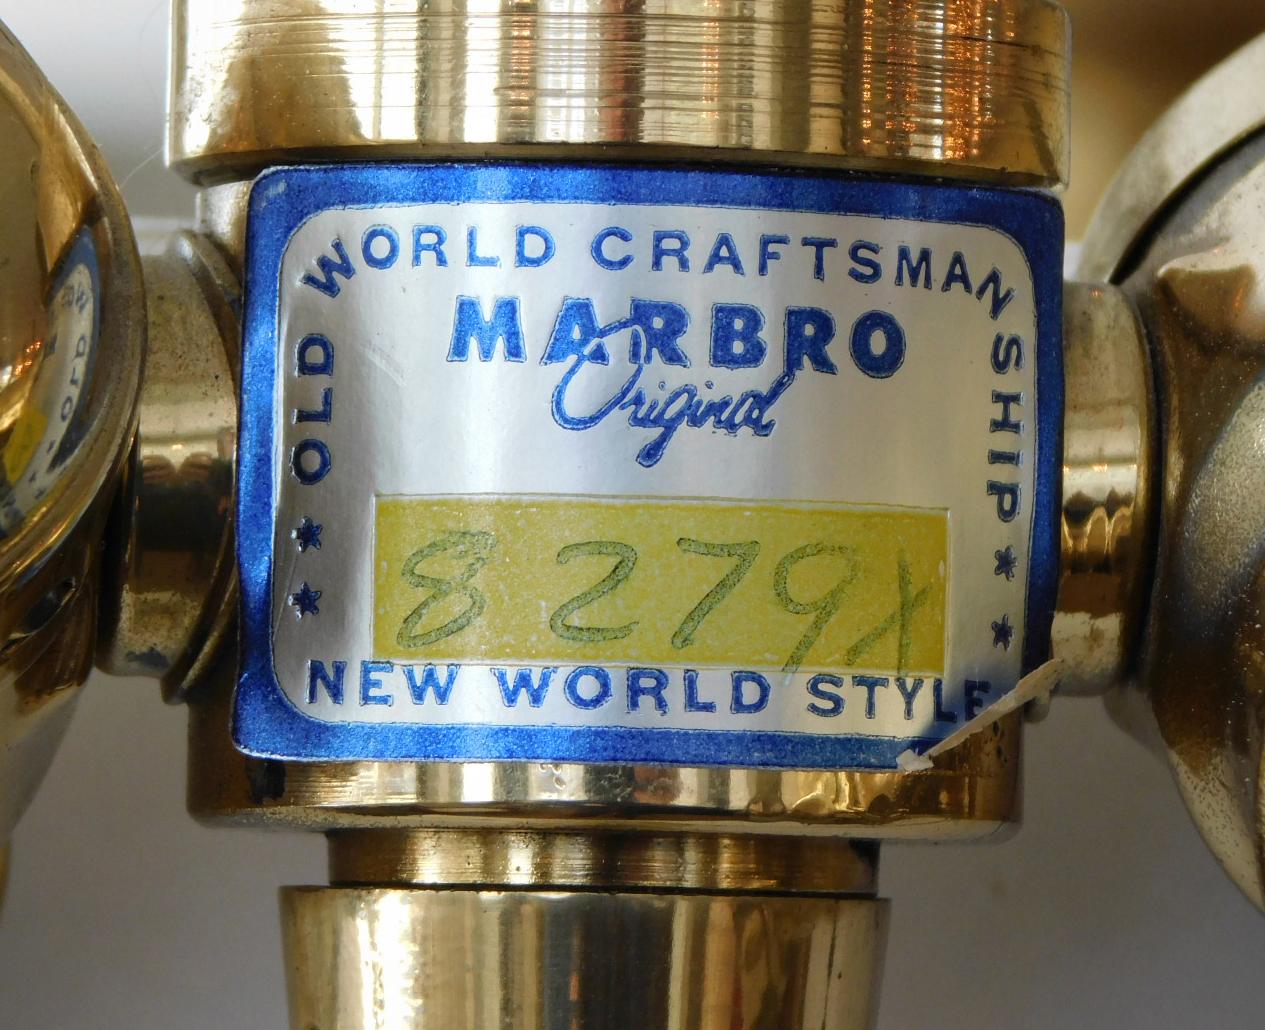 The Marbro Lamp Company was established by Morris Markoff and his brother (Mar-bro) after World War II in the garment district of Los Angeles. While specializing in a wide selection of antiques and decorative accessories, they are best known for